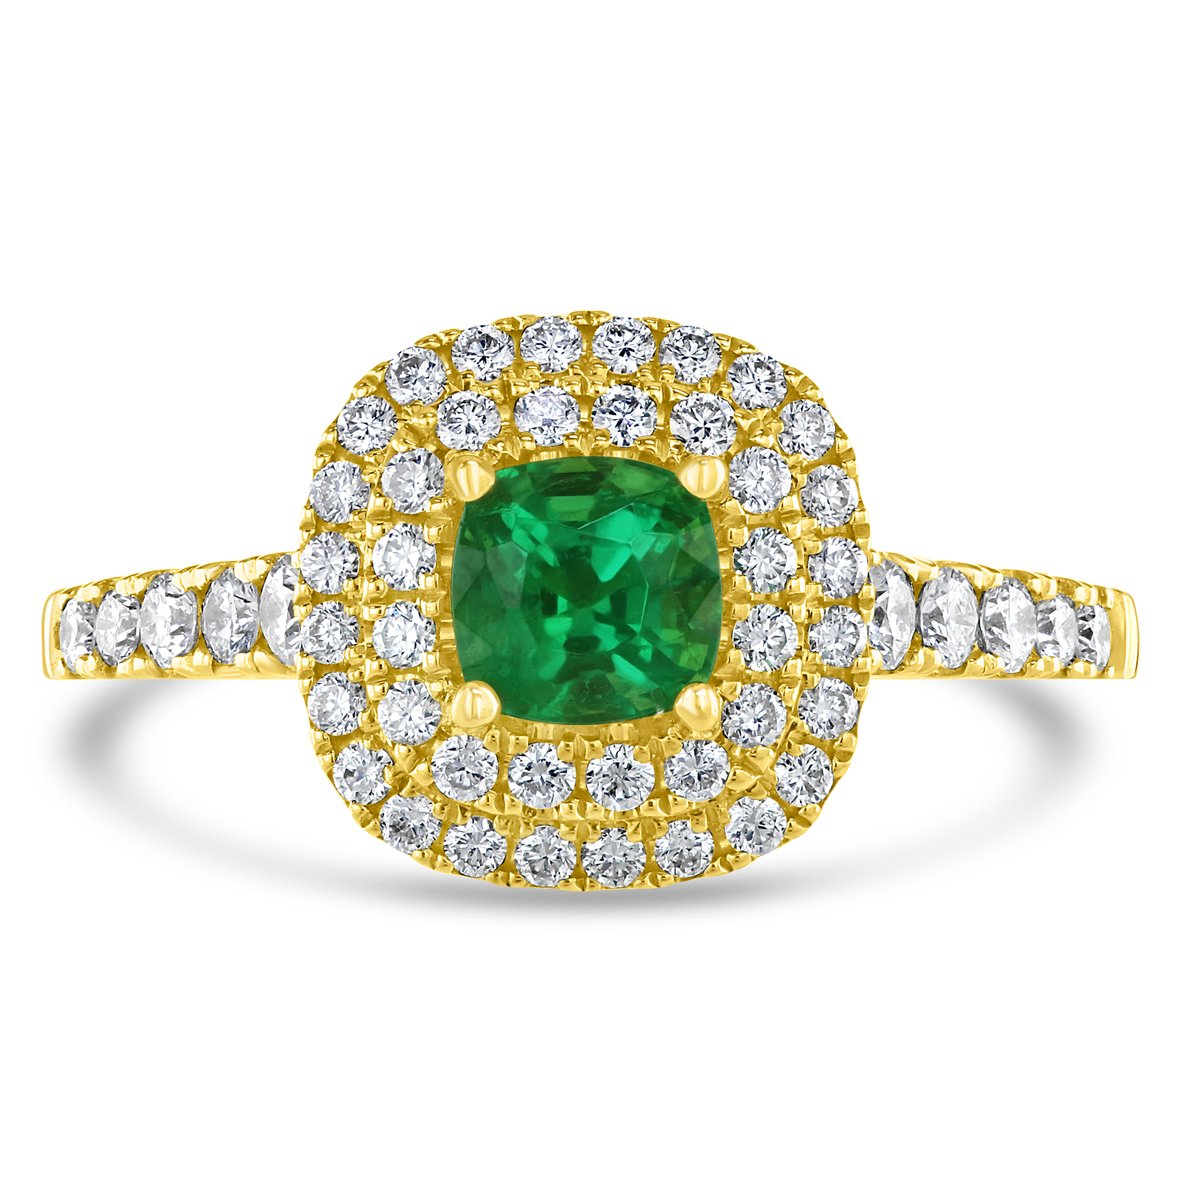 Sparkling with colour that's perfect for Spring, our sensational 18ct yellow gold emerald and diamond halo ring is in store today.

 #EmeraldRing #SpringFashion #RingOfTheDay

ow.ly/psXn50Rzjqu